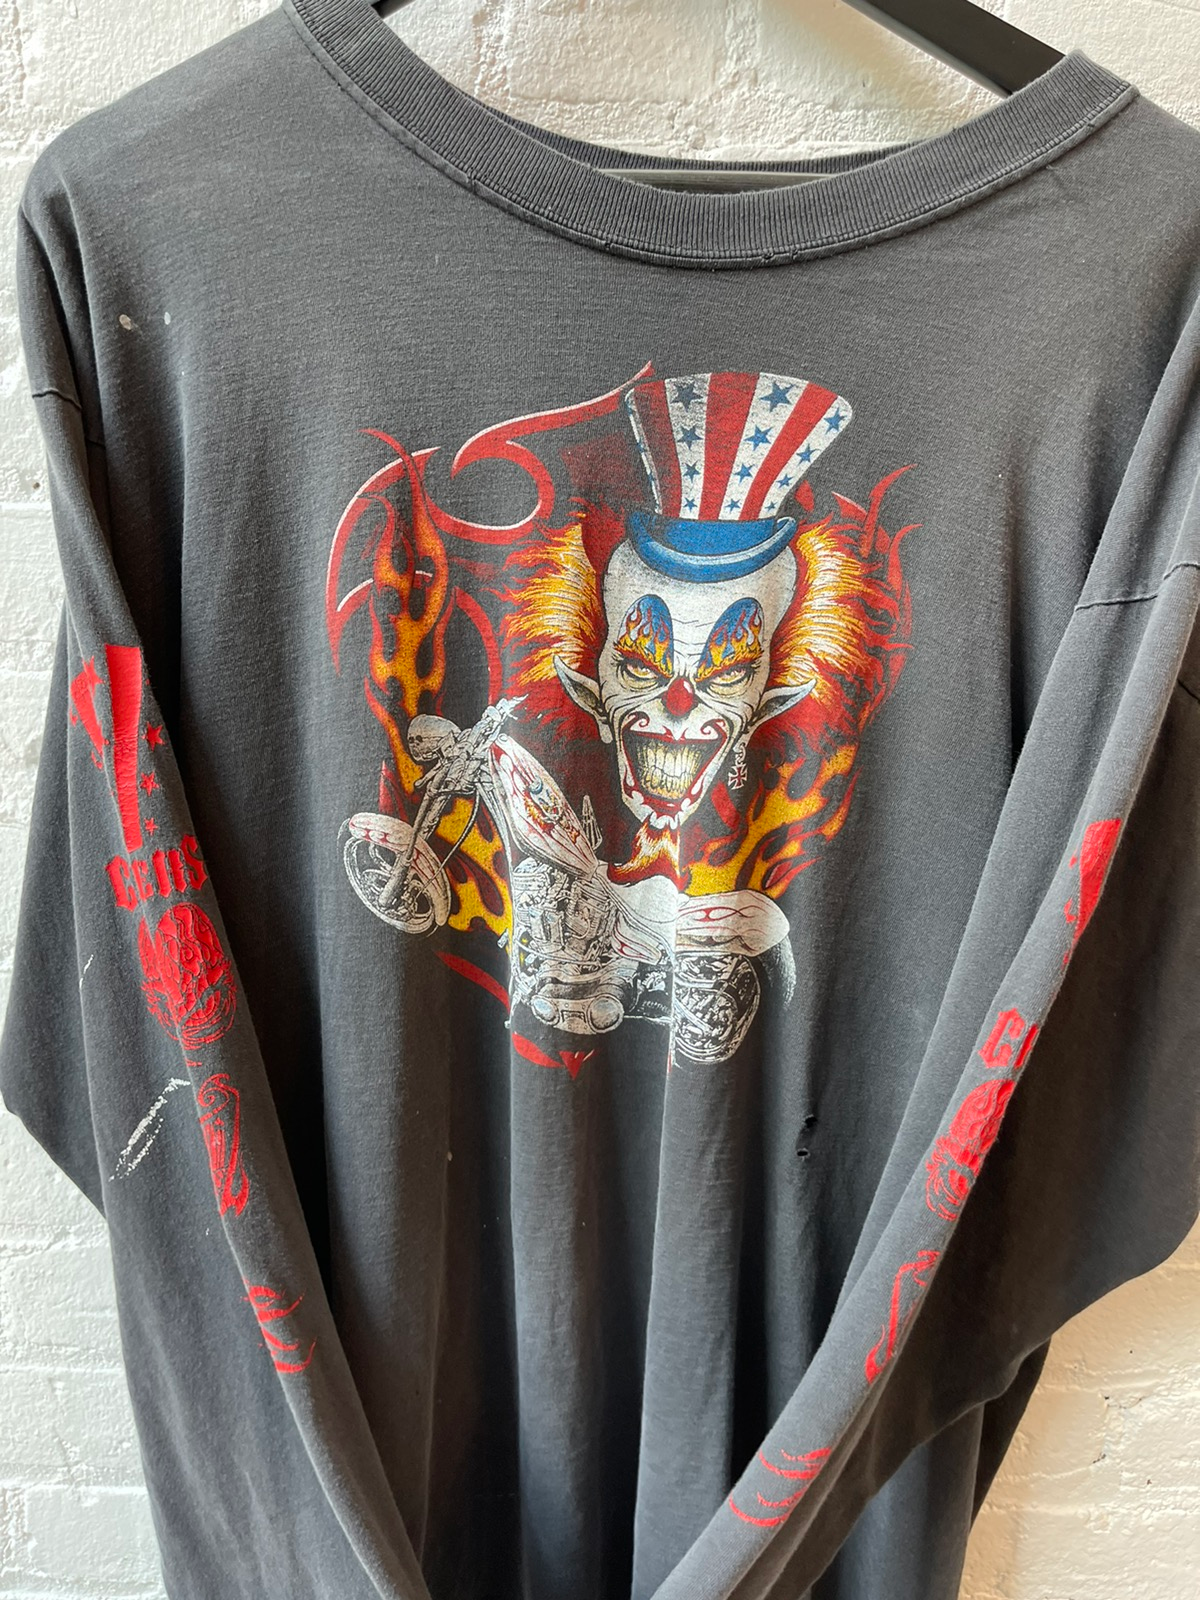 Vintage DEMENTED CRAZY MOTORCYCLE CLOWN THRASHED SHIRT L XL